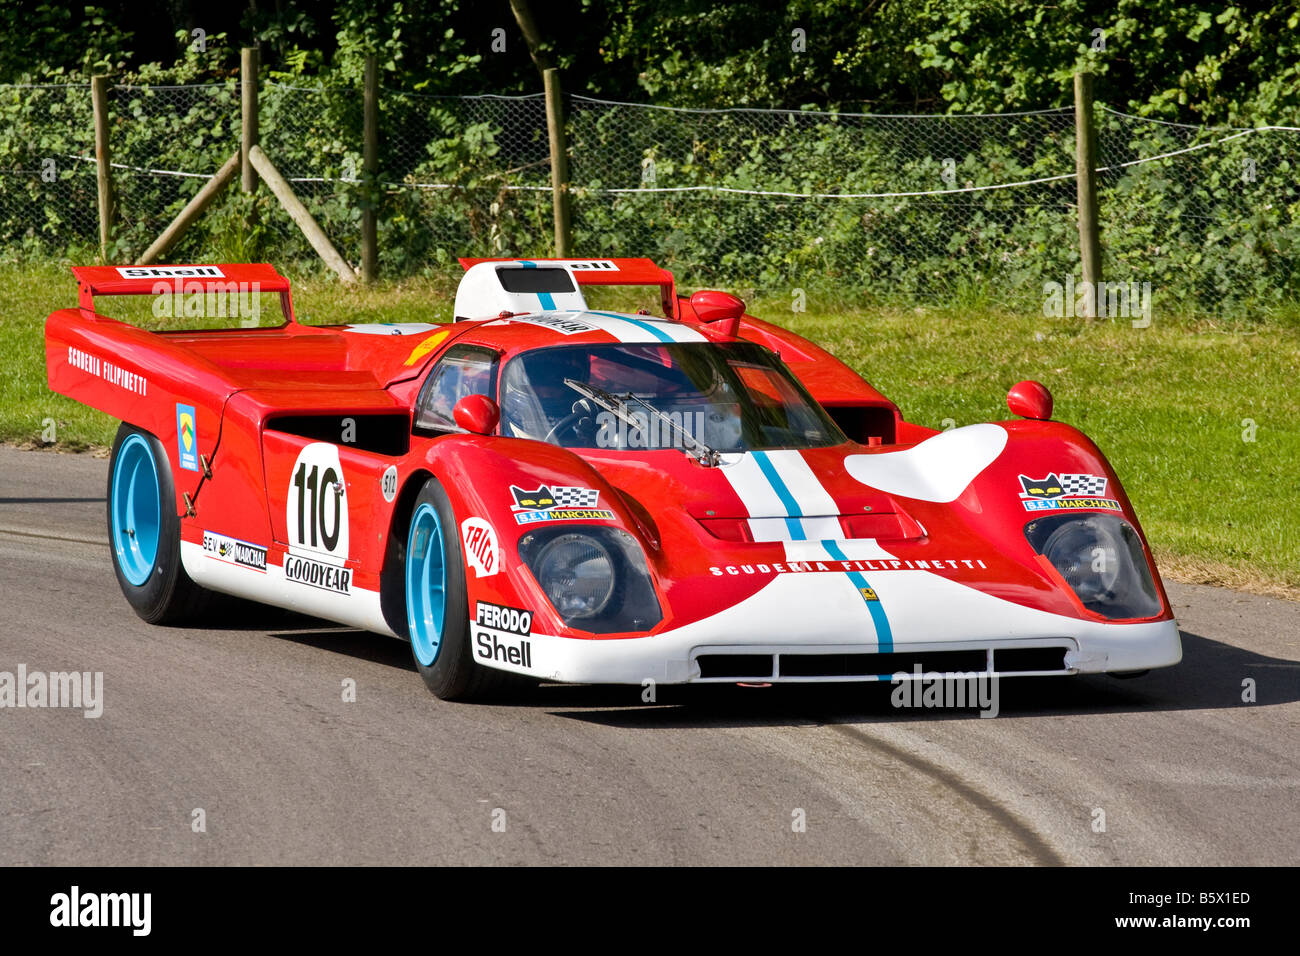 1969 Ferrari 512M Le Mans racer with driver Adrian Newey at Goodwood Festival of Speed, Sussex, UK. Stock Photo